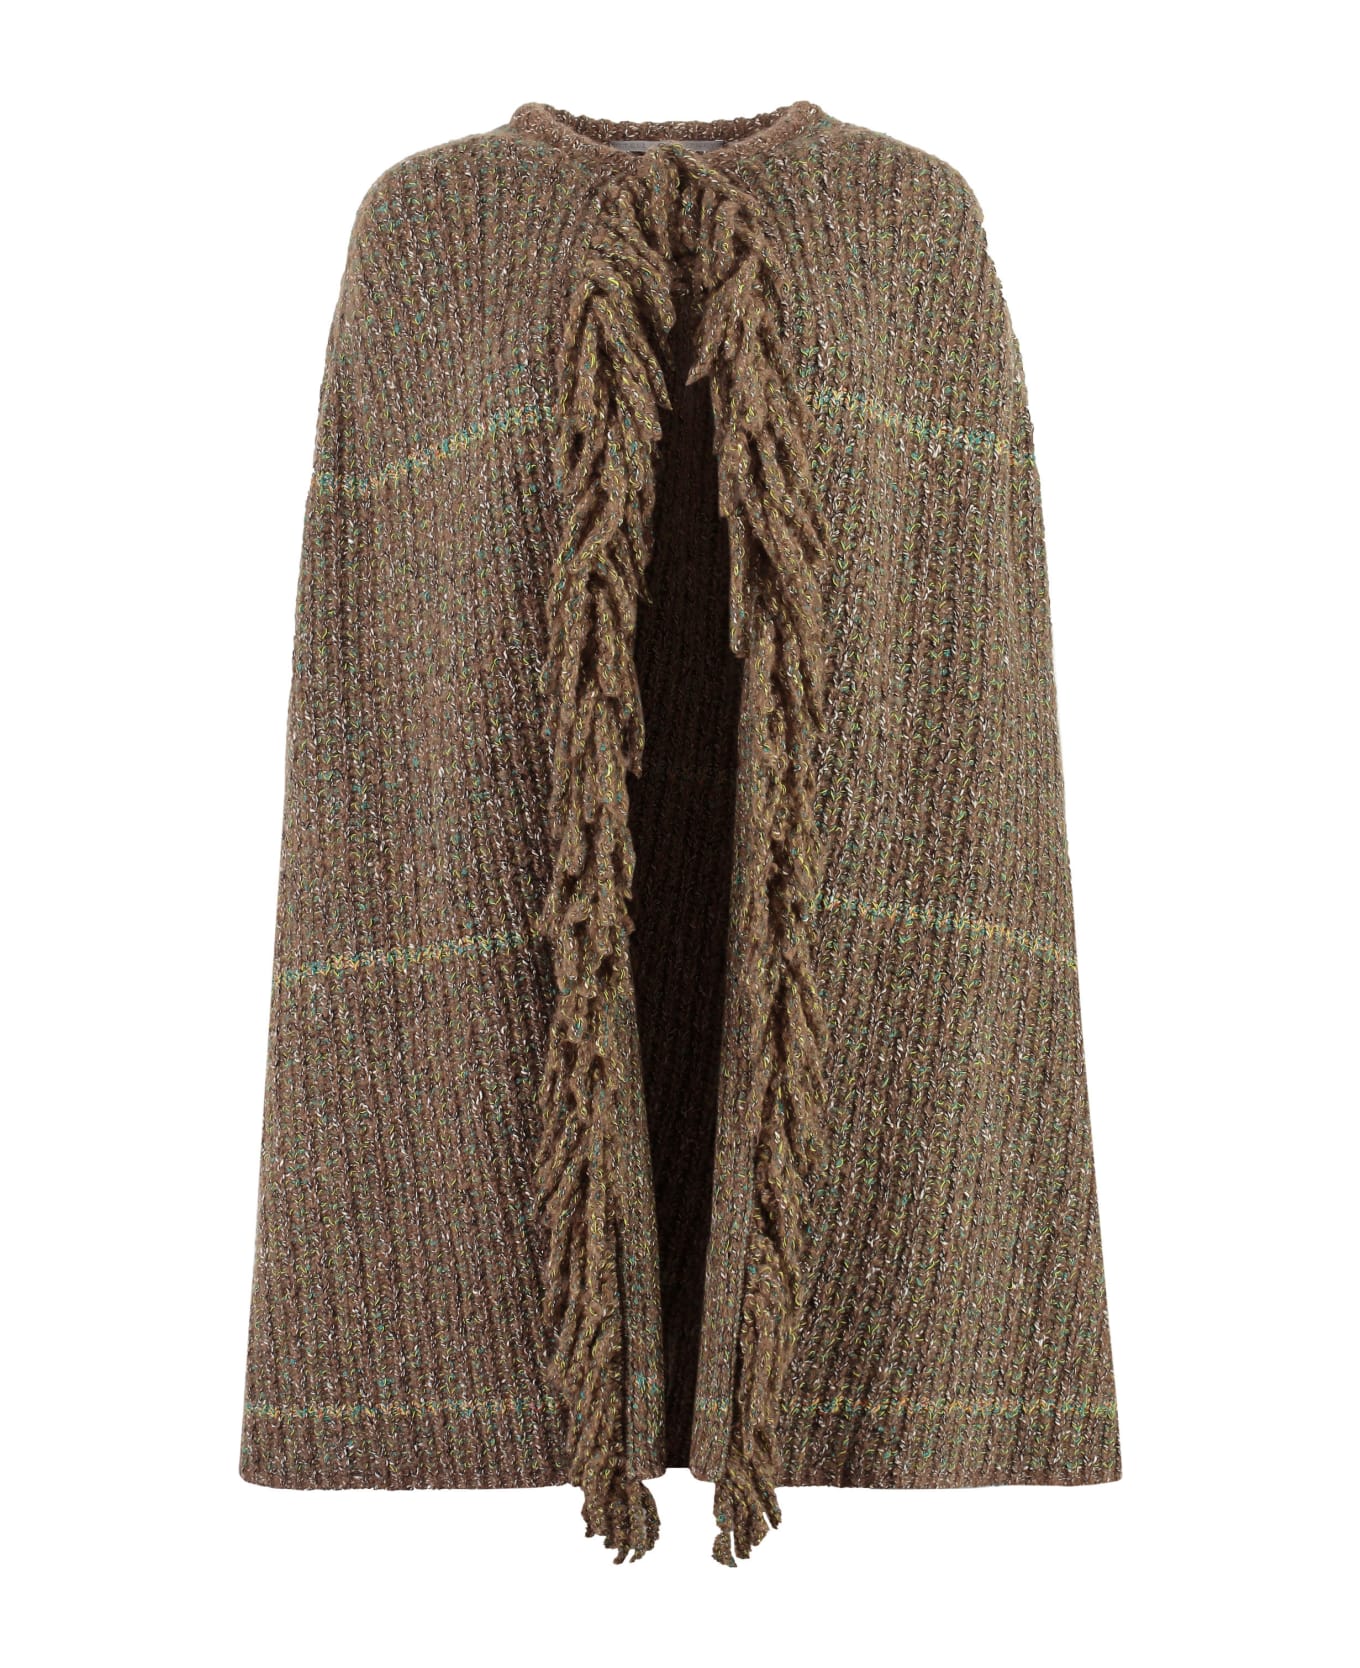 Stella McCartney Knitted Cape Coat - brown